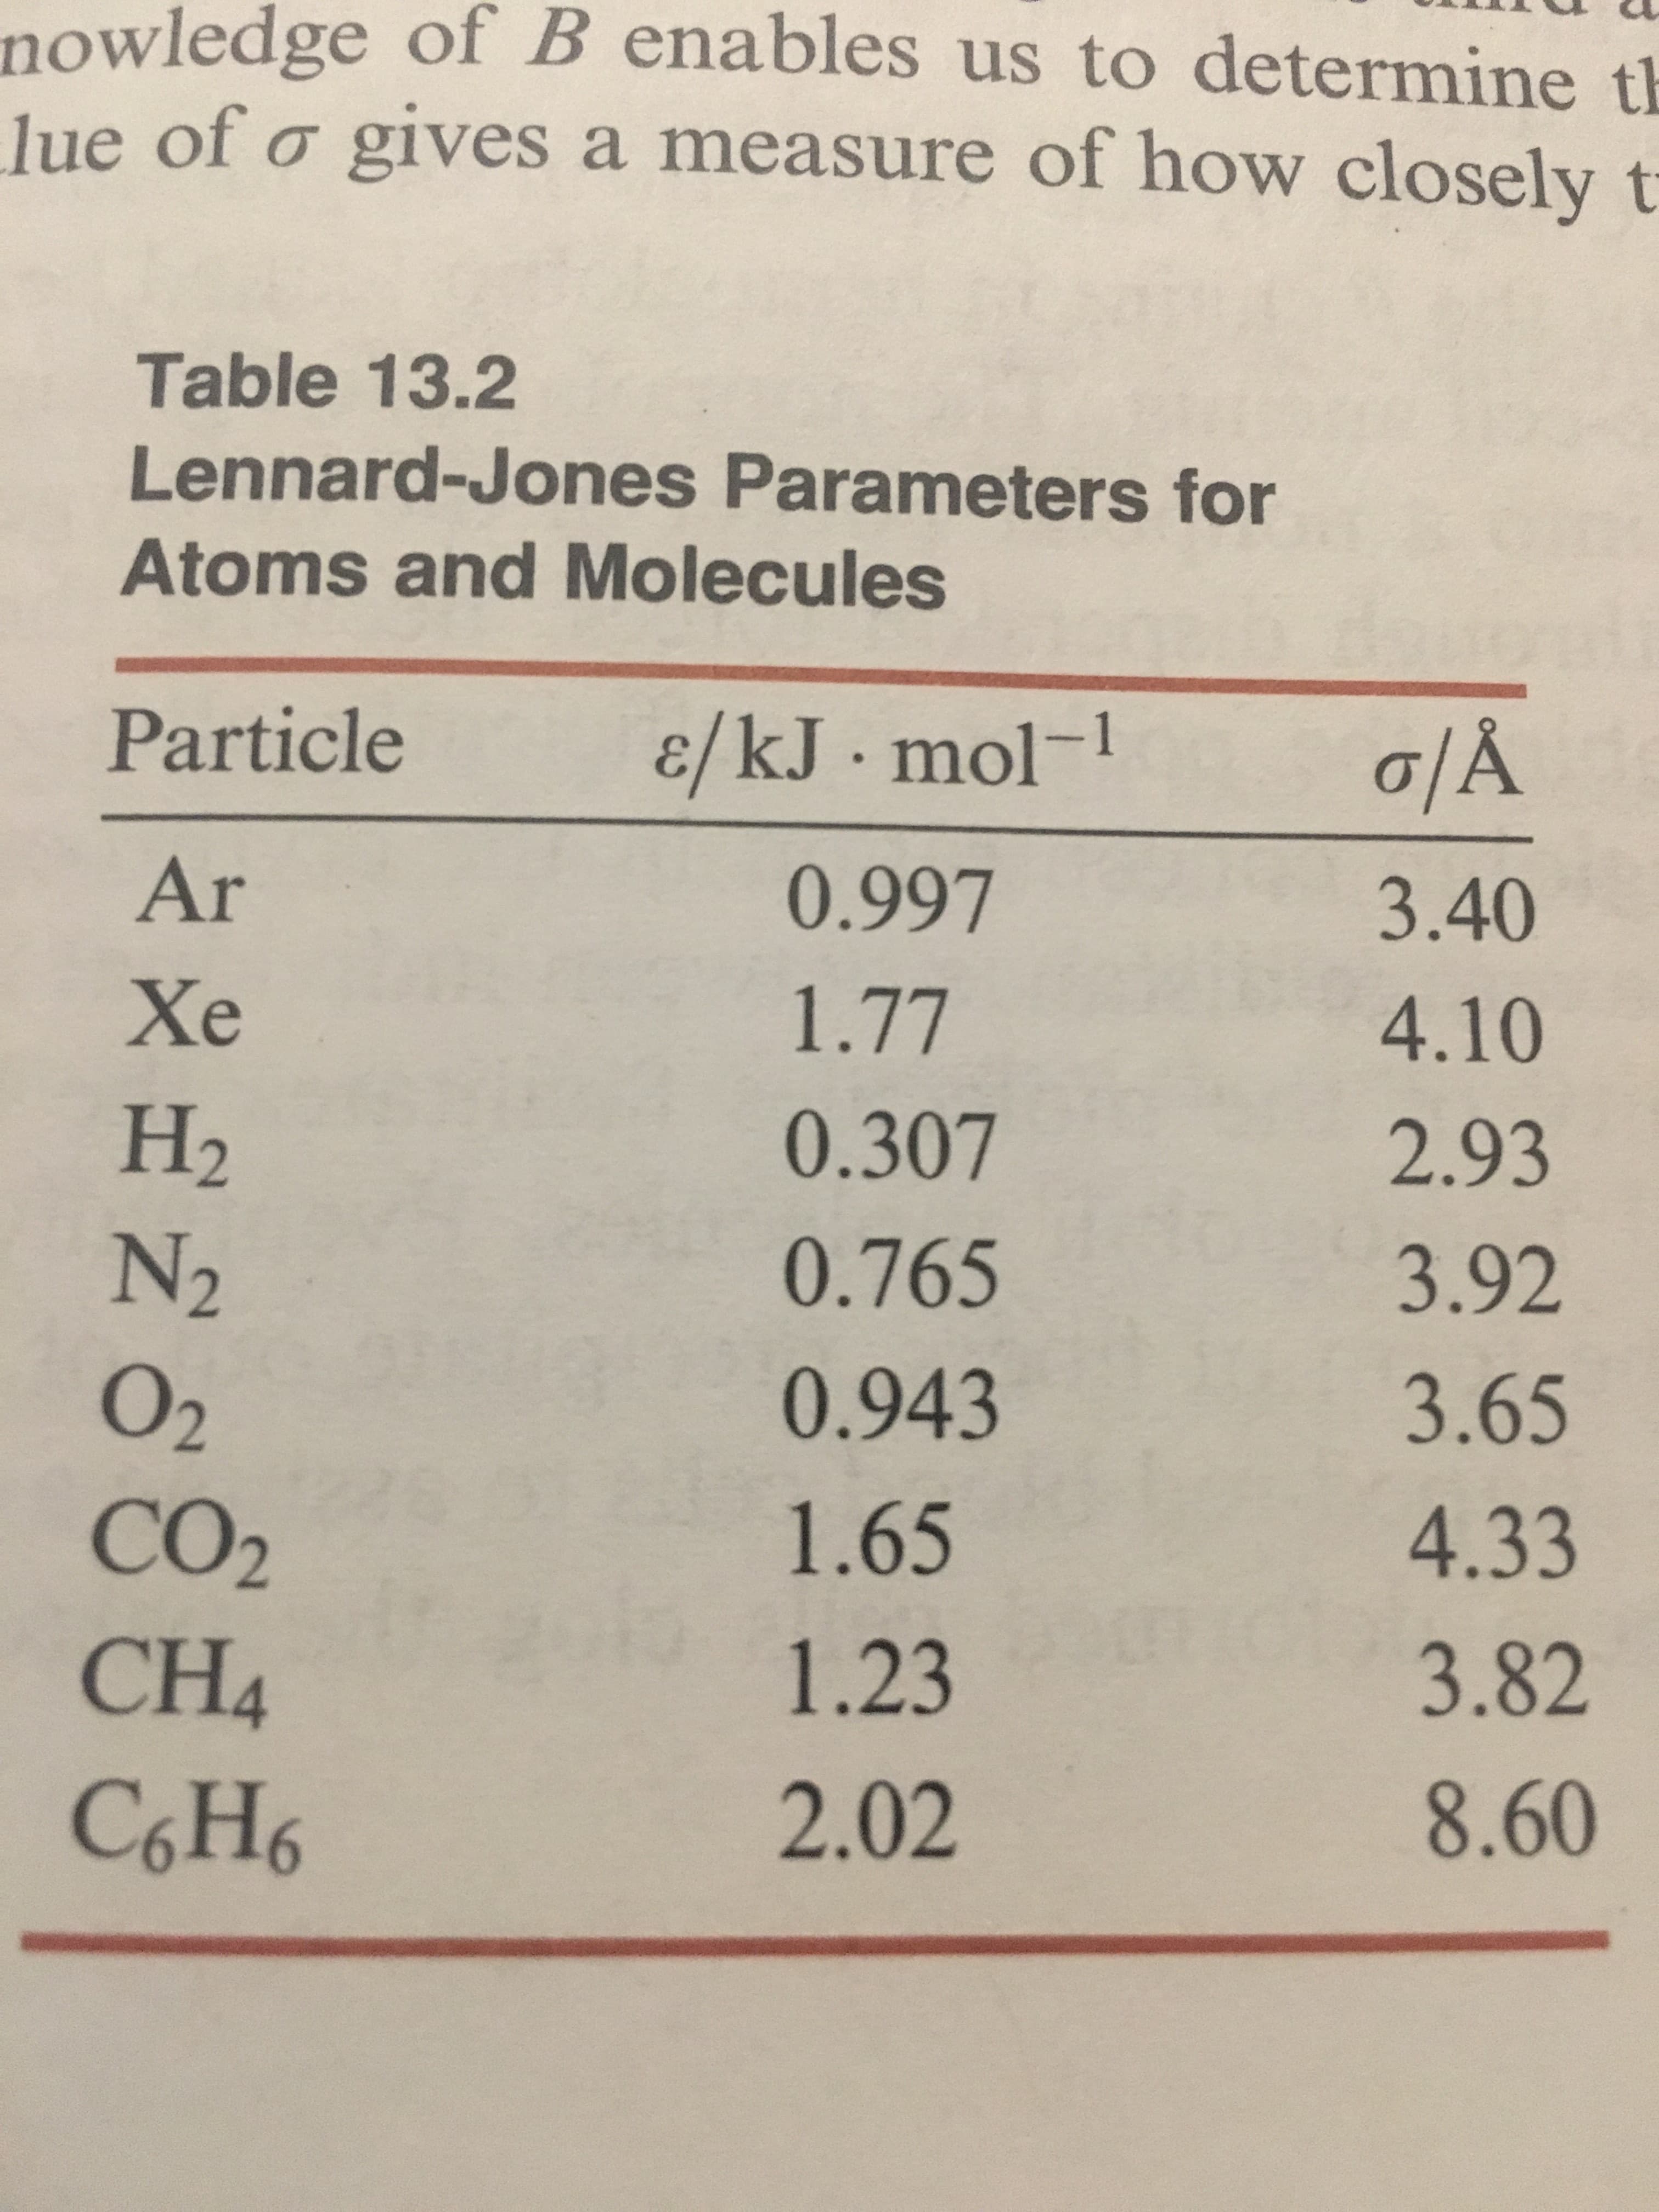 nowledge of B enables us to determine t
lue of σ gives a measure of how closely t
Table 13.2
Lennard-Jones Parameters for
Atoms and Molecules
e/kJ-mol-1
0.997
1.77
0.307
0.765
0.943
1.65
1 .23
2.02
σΑ
3.40
4.10
2.93
3.92
3.65
4.33
3.82
8.60
Particle
Ar
Xe
Но
N2
CO2
CH4
CoH6
